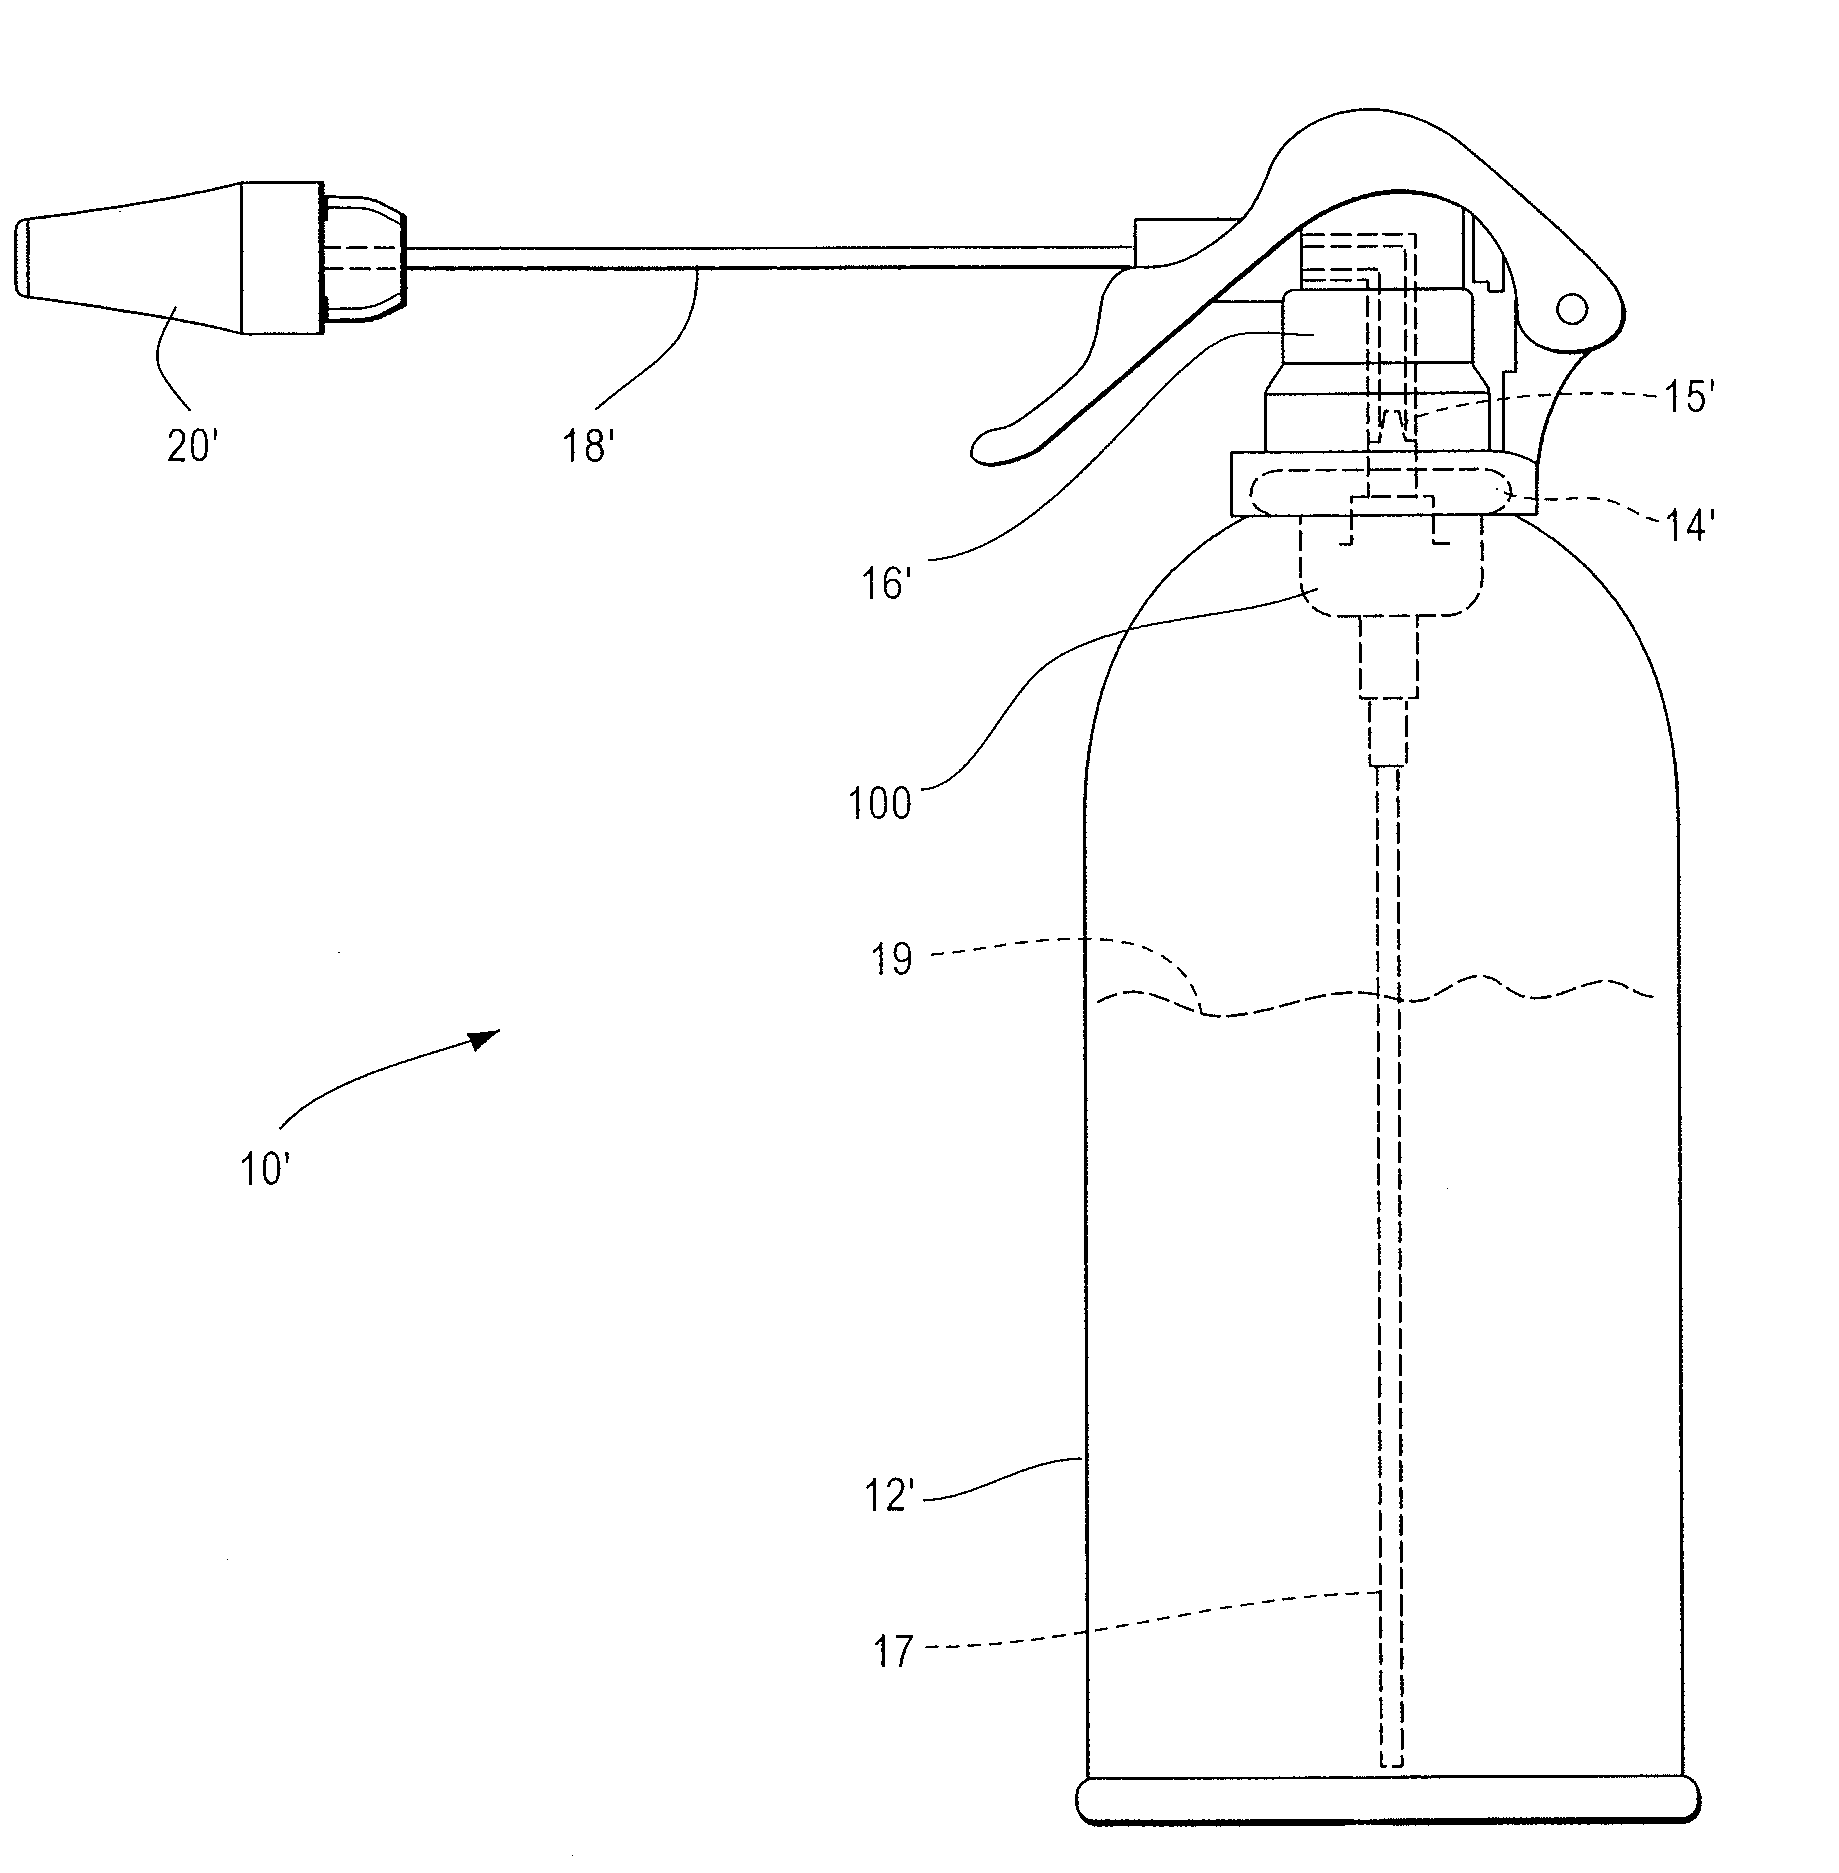 Cryosurgical device with metered dose